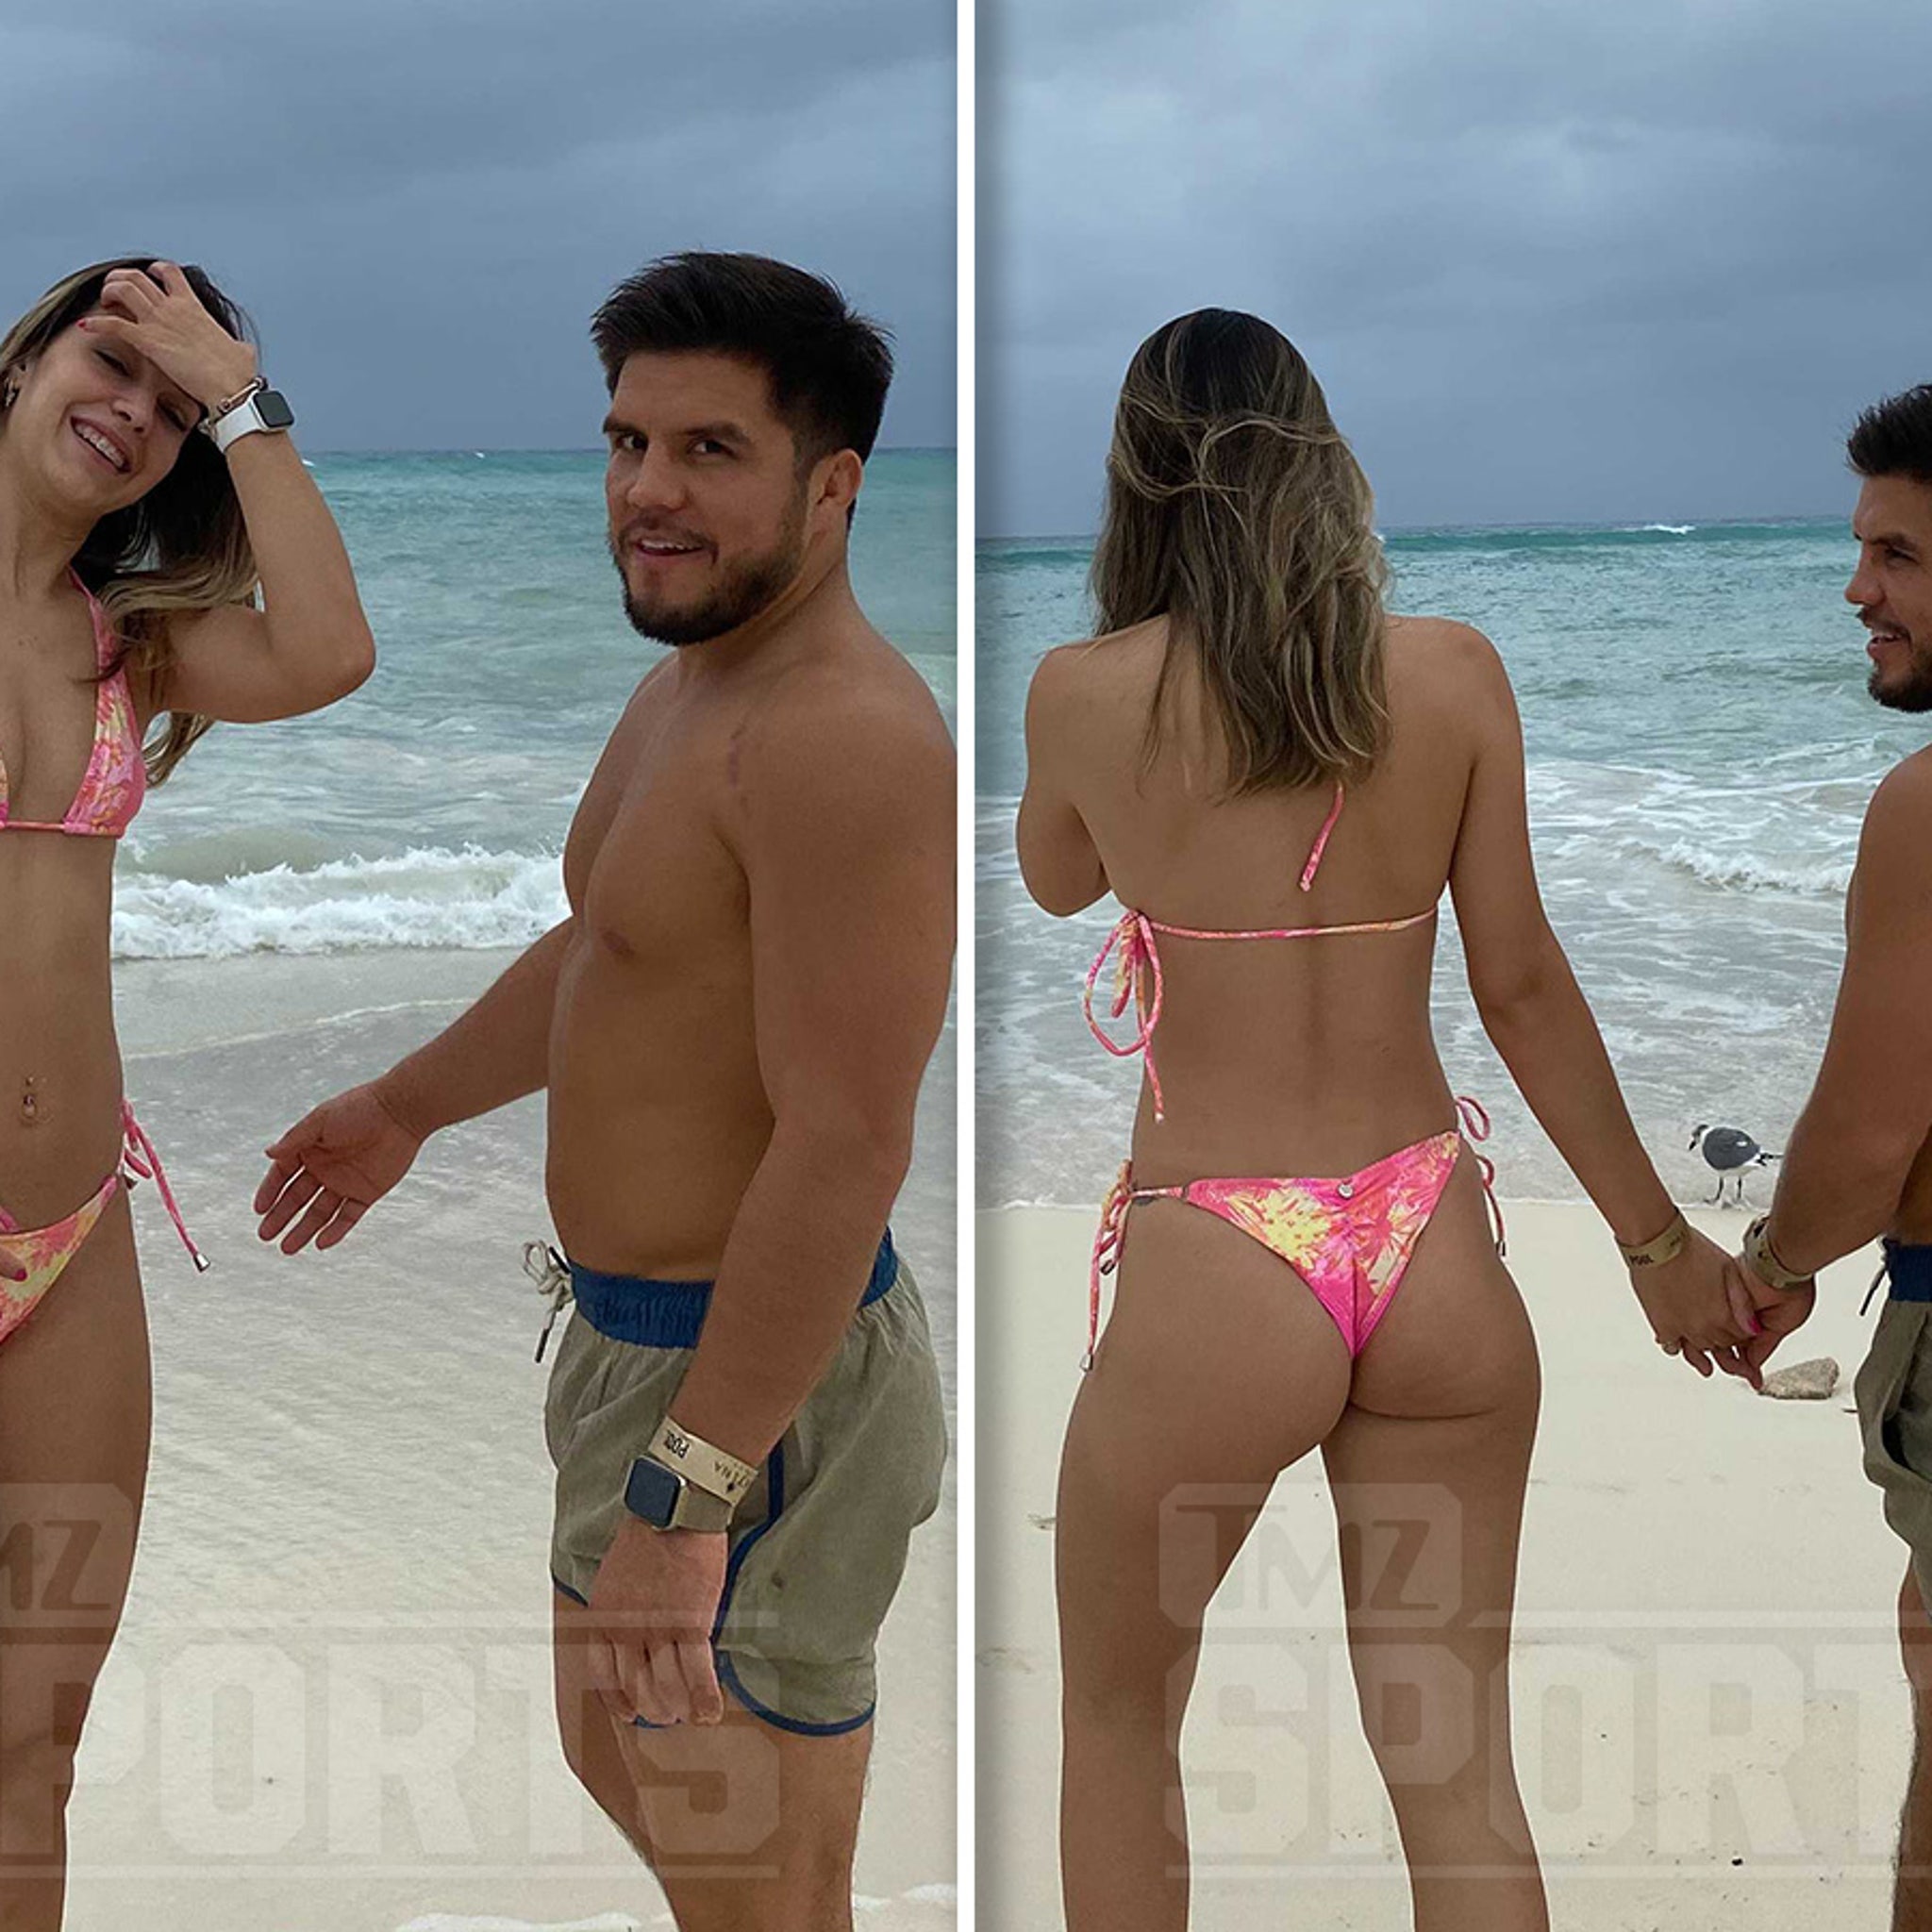 UFCs Henry Cejudo Hits the Beach with Smokin Hot New Lady, Brazilian Model! picture